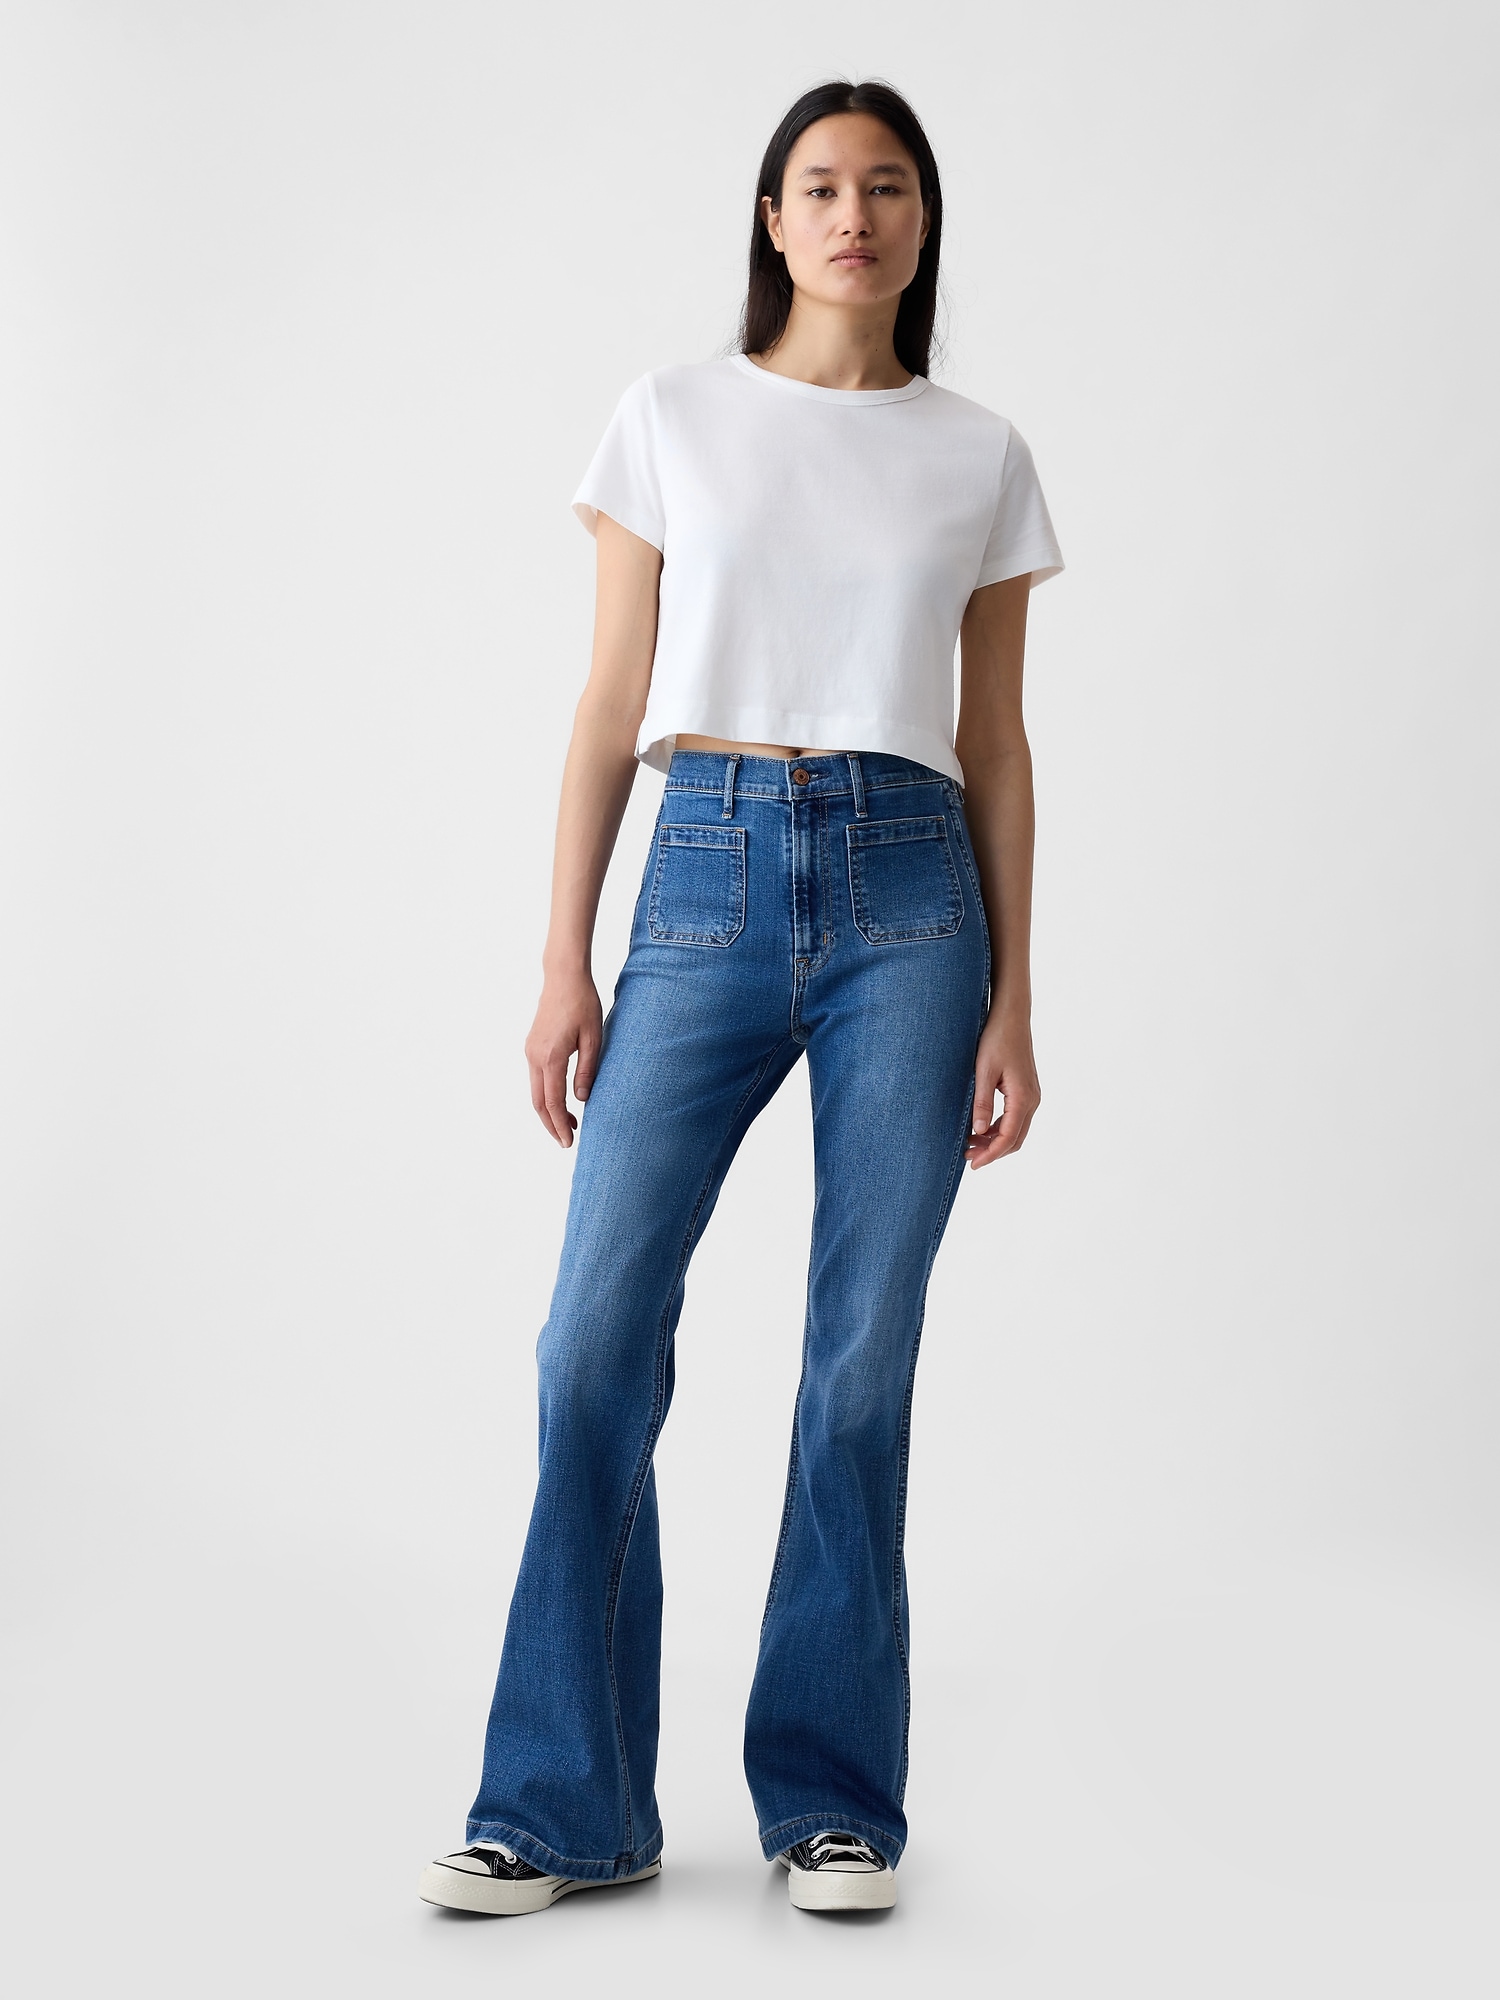 8 Outfits That Prove High-Waisted Jeans Are Eternally Chic